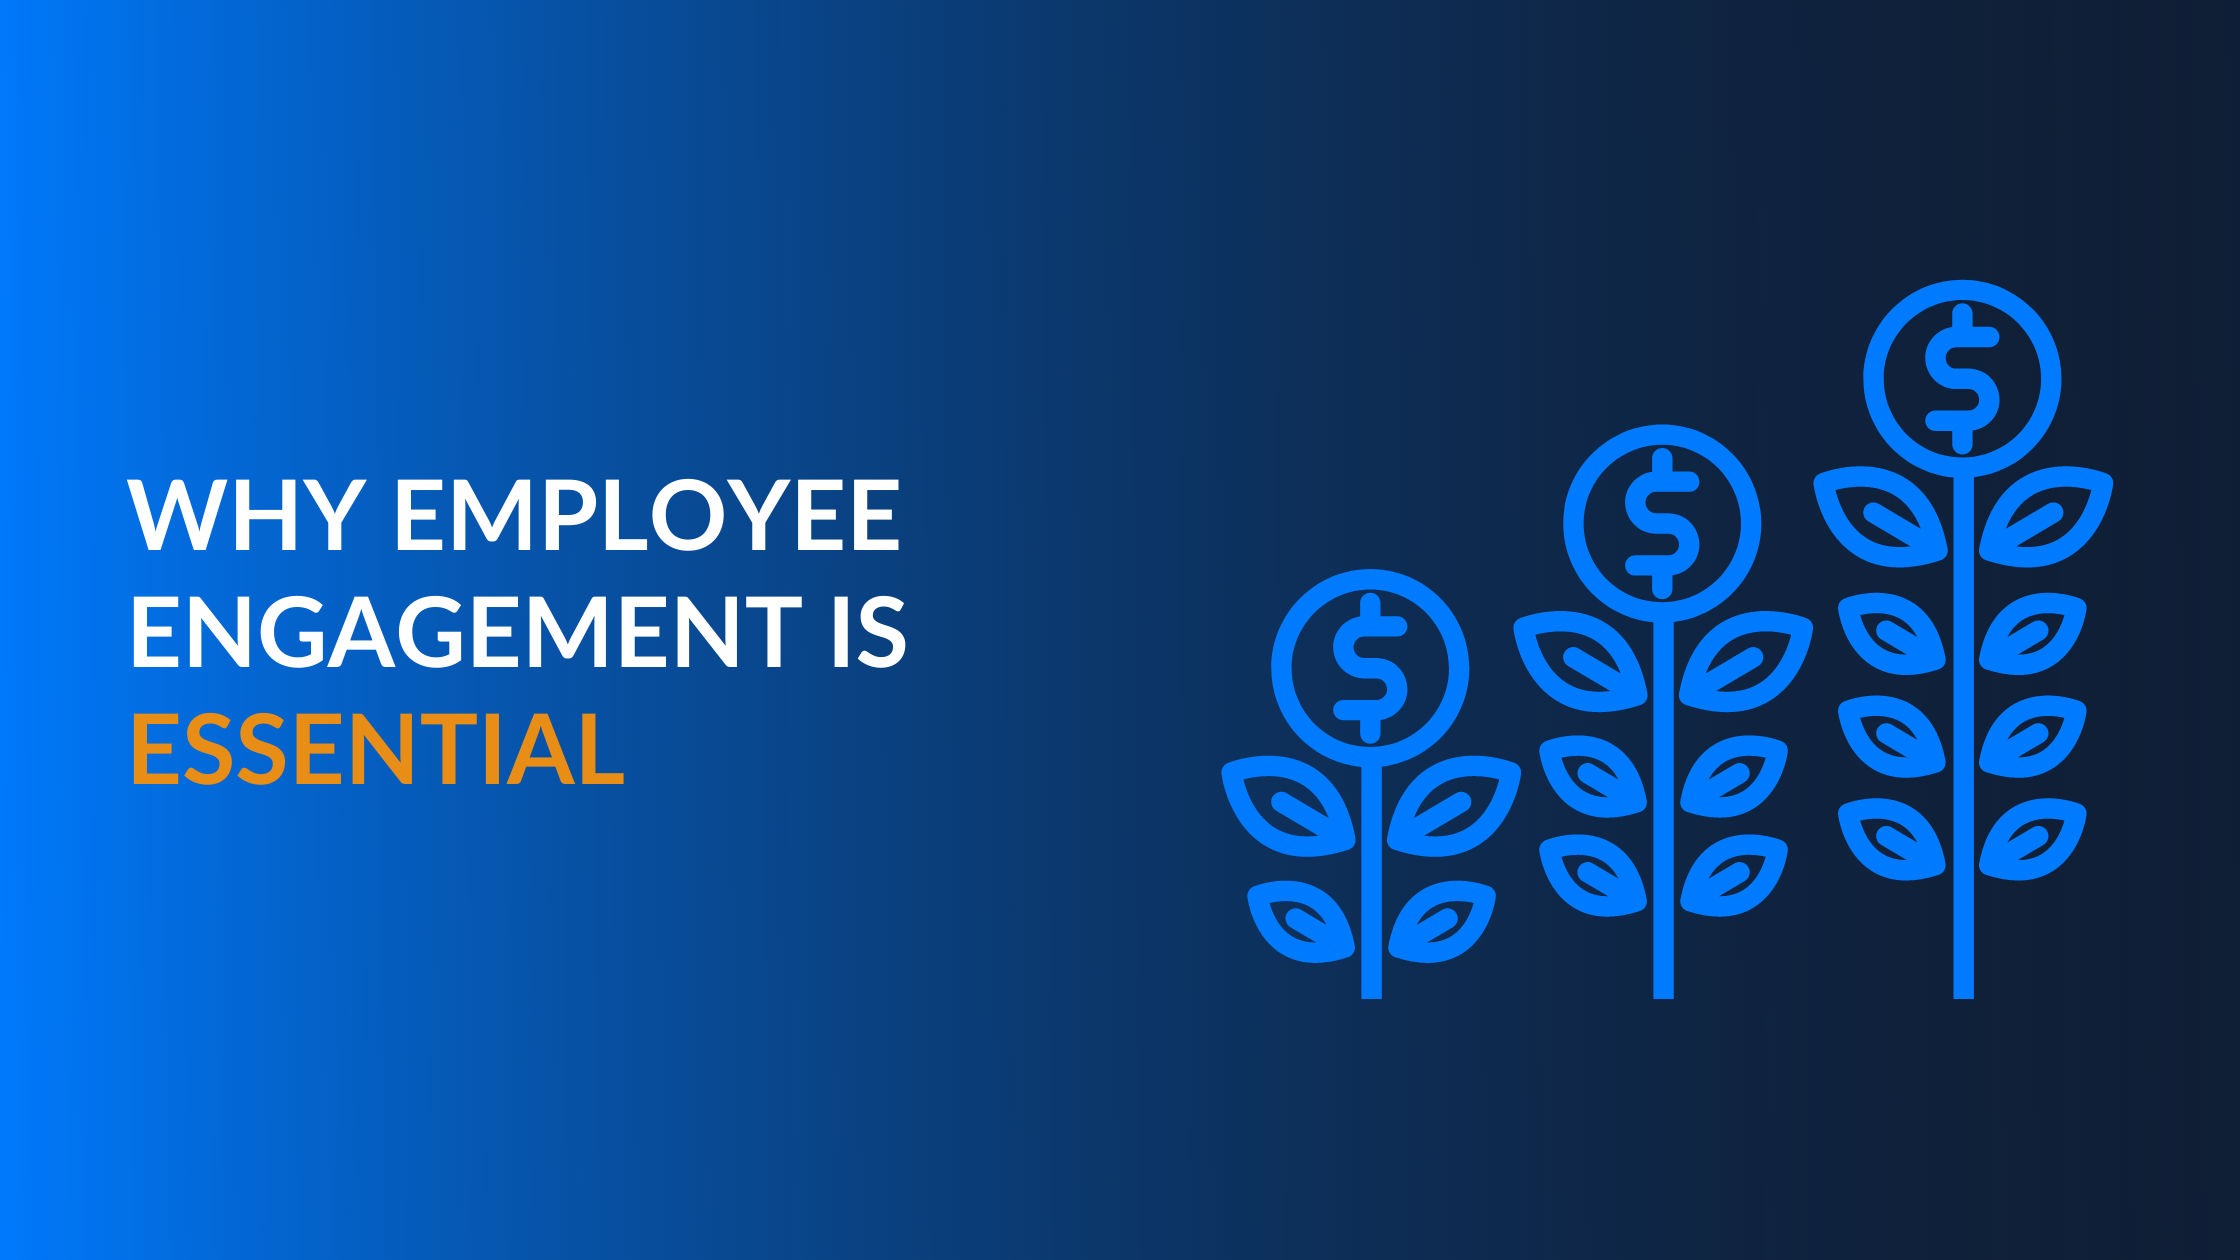 Why Employee Engagement is Essential for Your Business